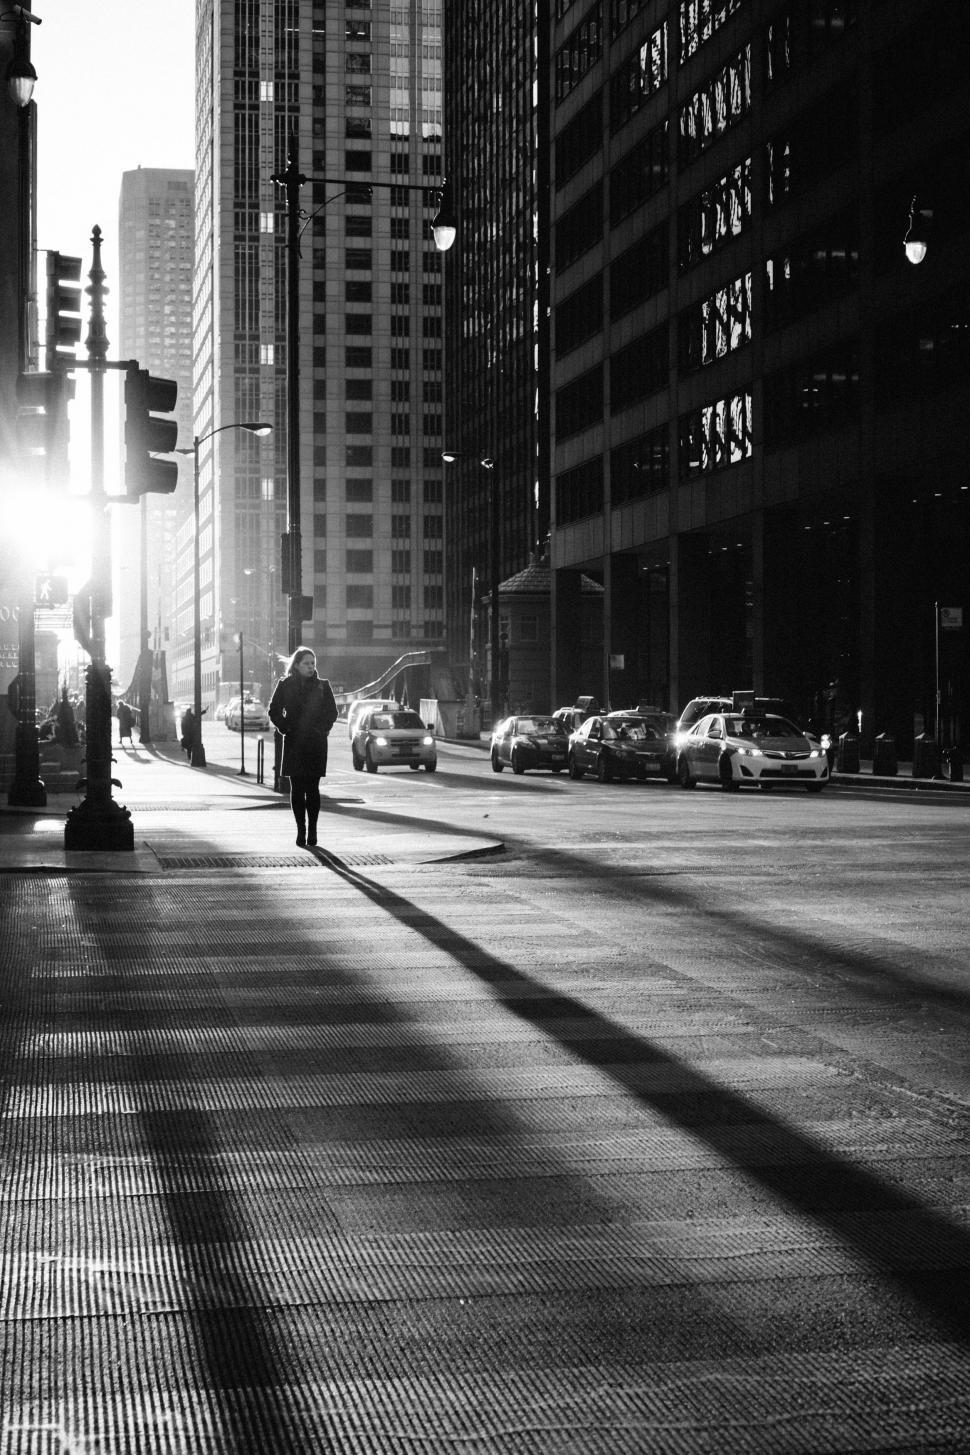 Free Image of Person Walking Down Street Next to Tall Buildings 